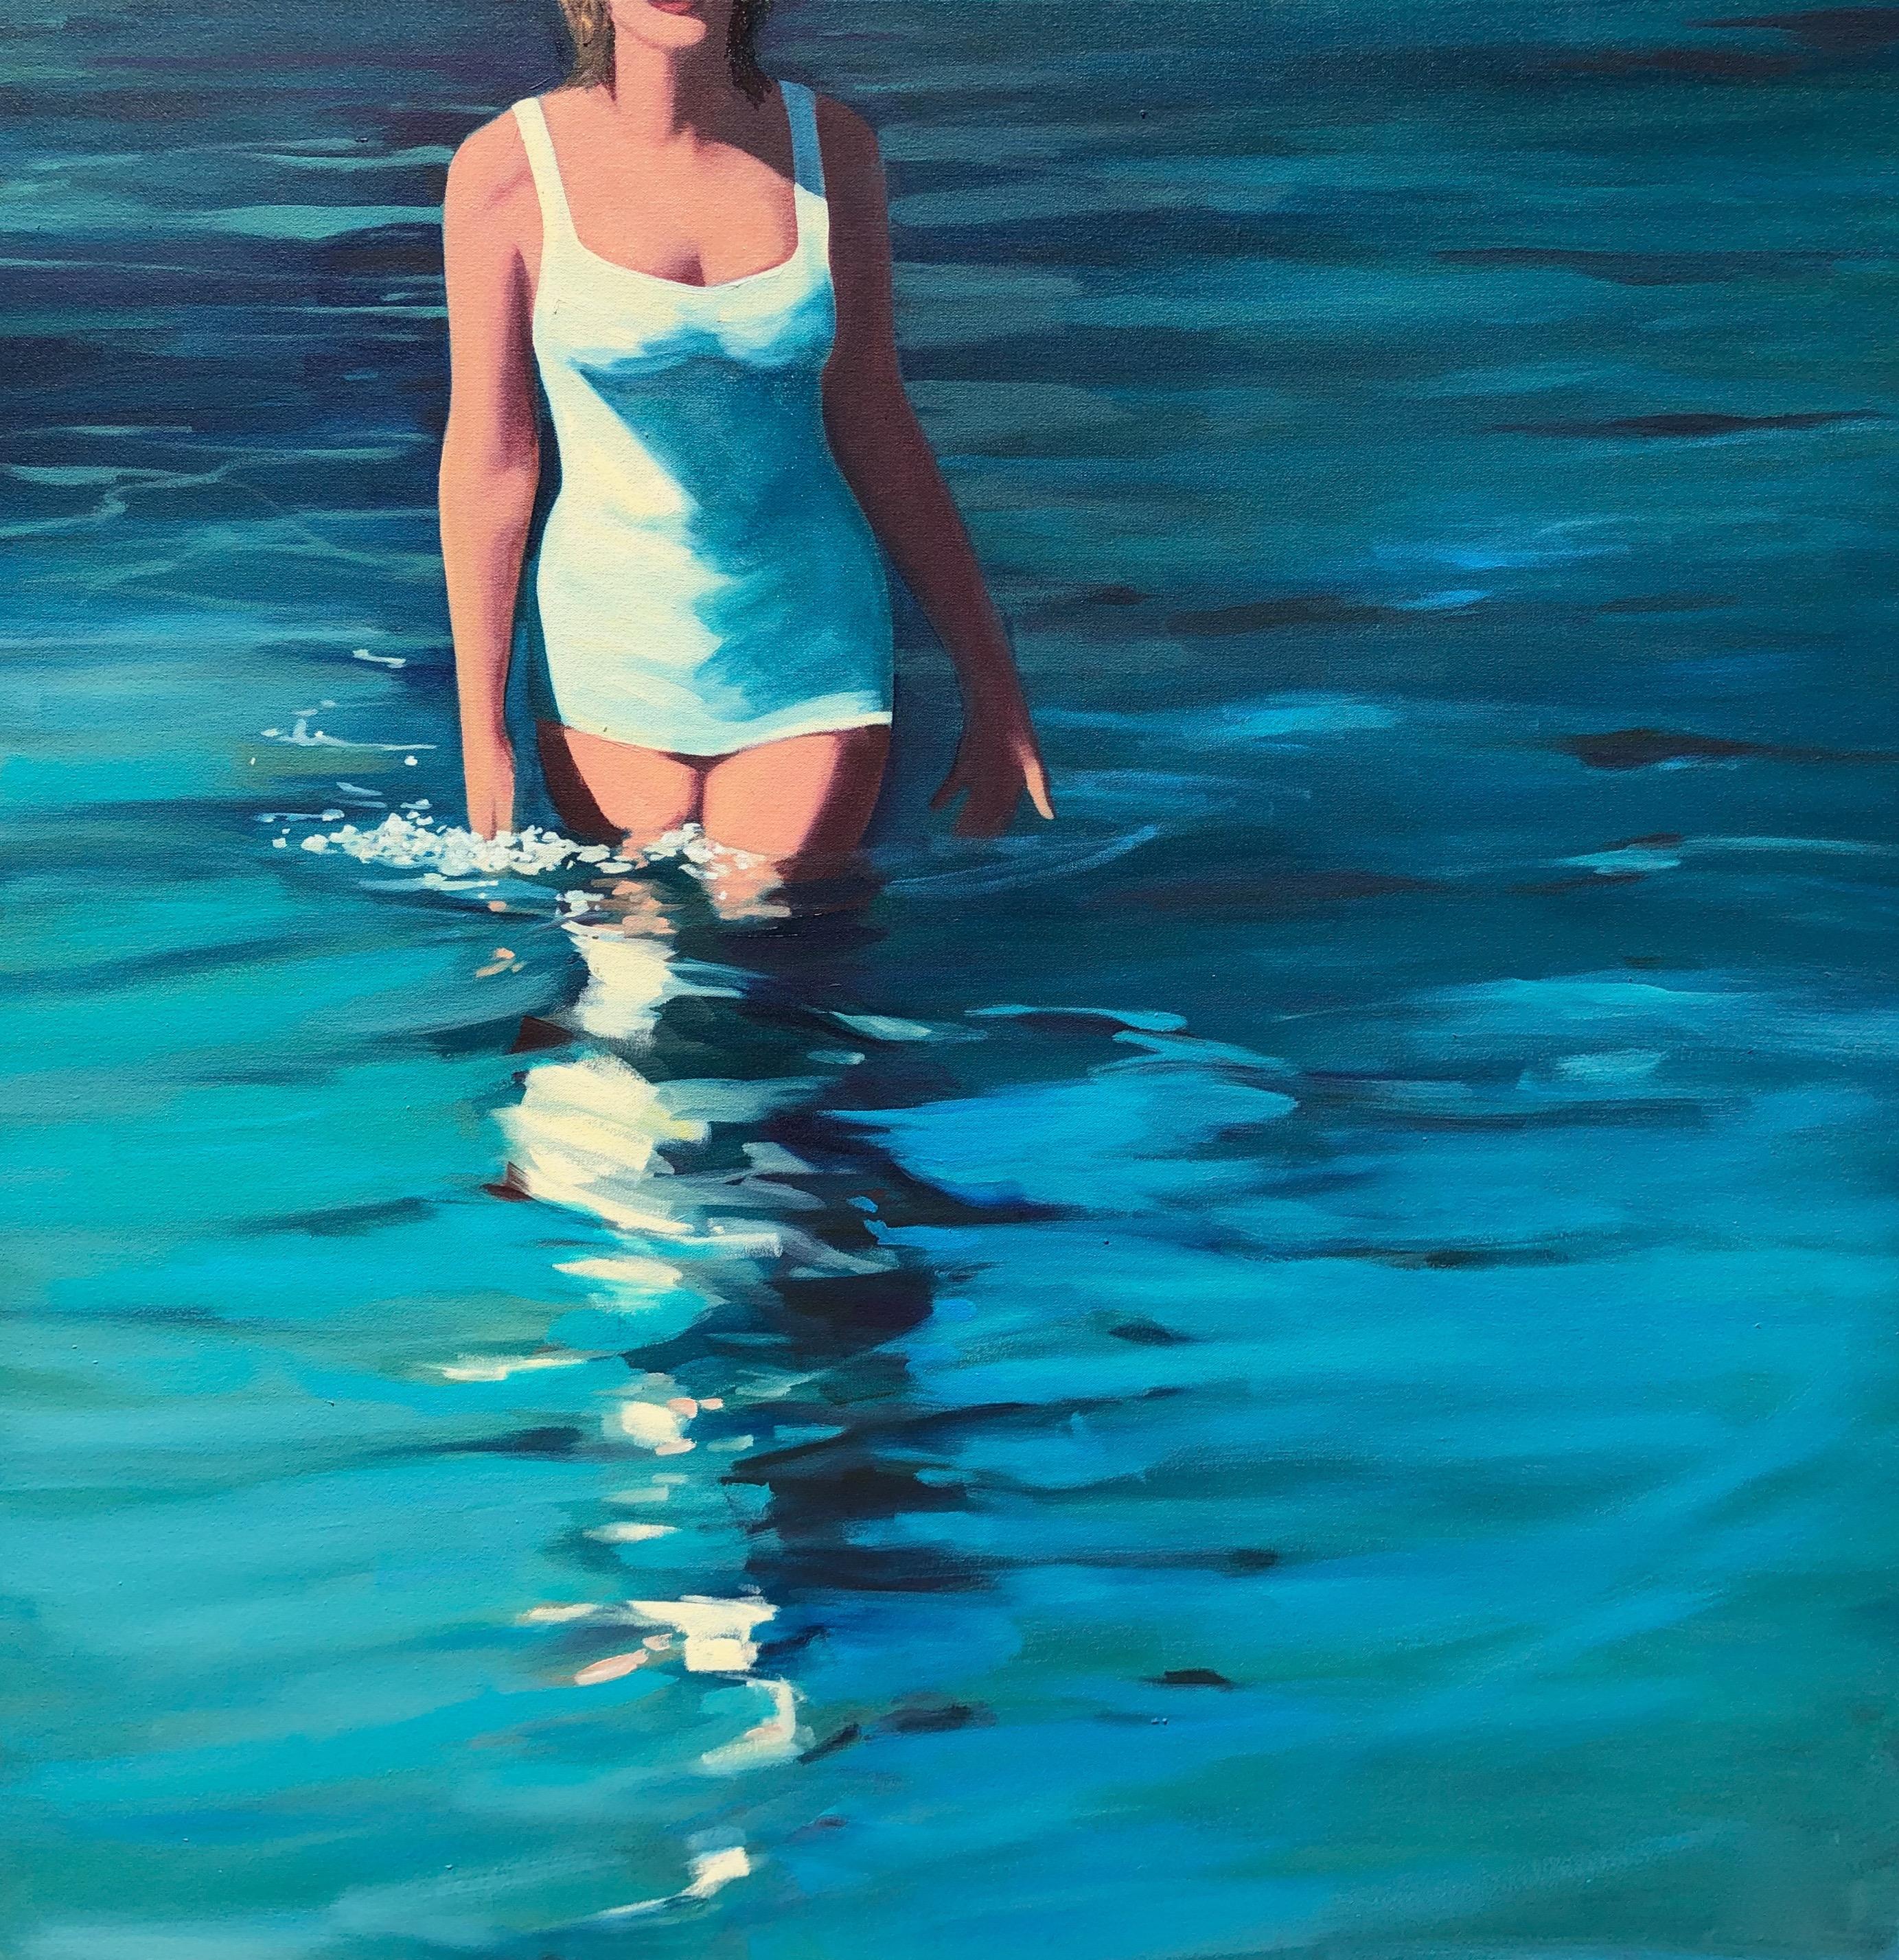 T.S. Harris Figurative Painting - "In The Surf" oil painting of a woman wading into blue water in a white swimsuit